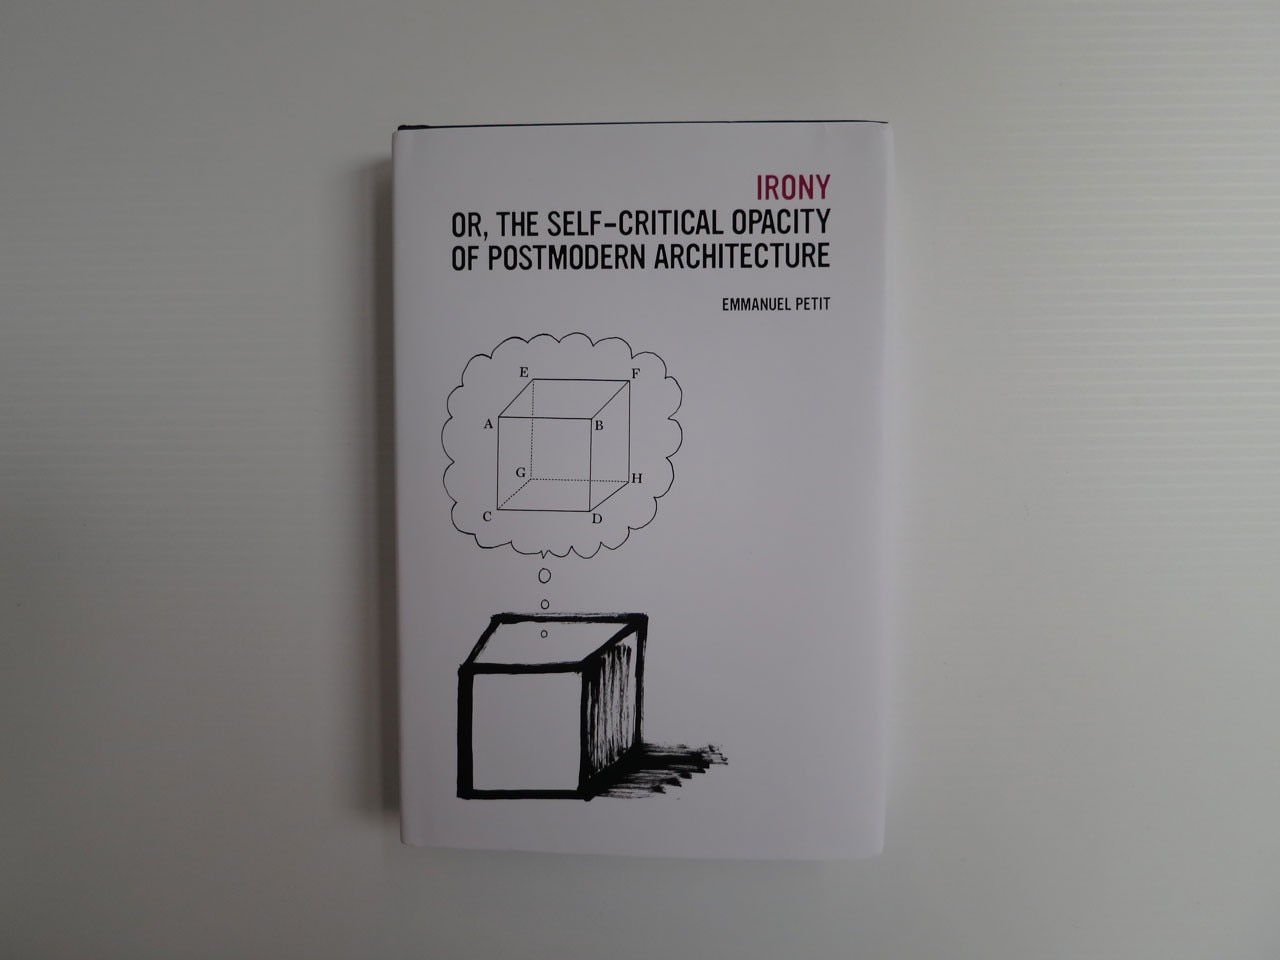 Emmanuel Petit, Irony; or, The Self-Critical Opacity of Postmodern Architecture, Yale Press 2013